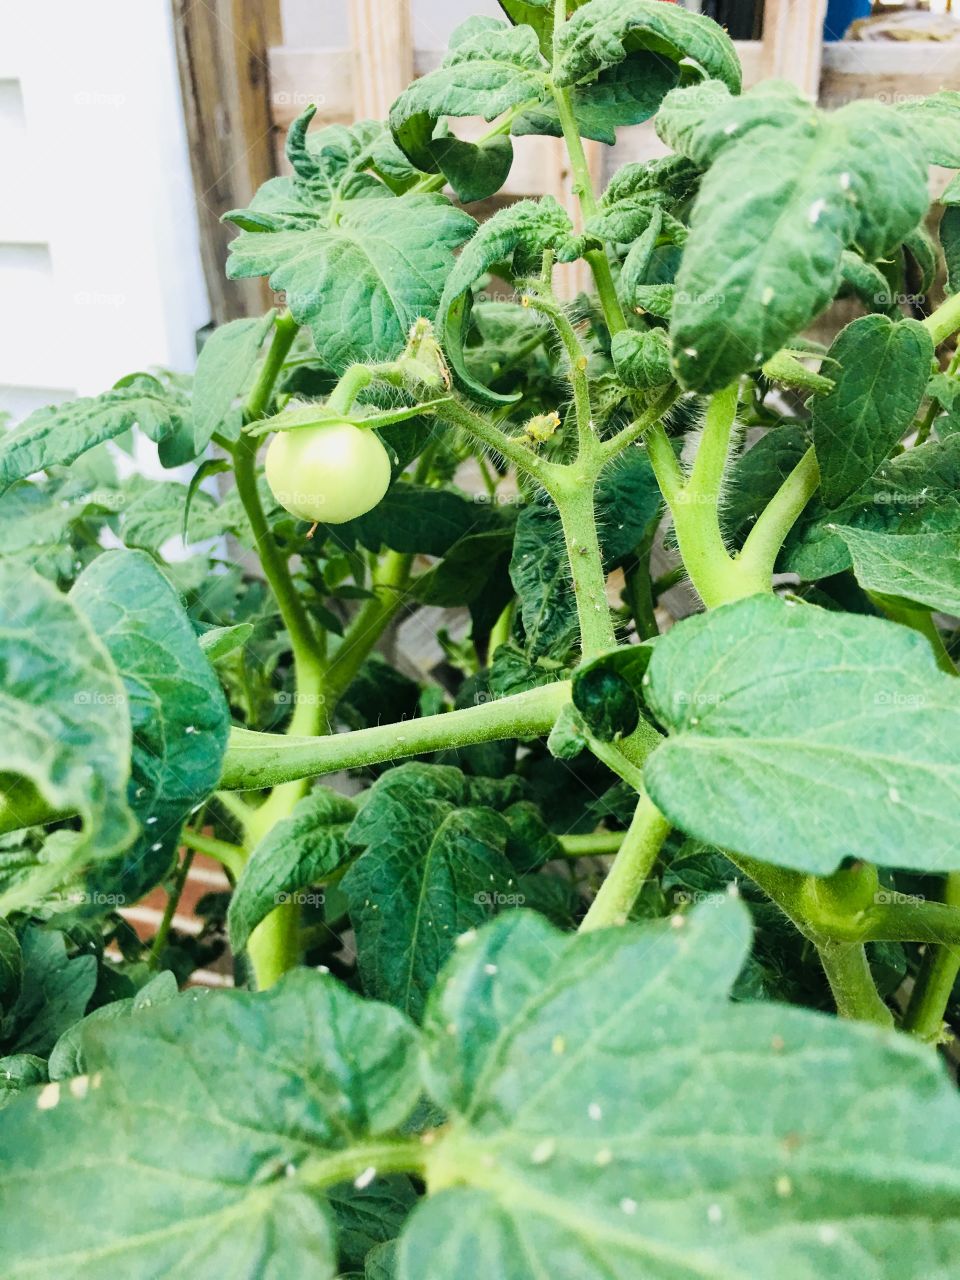 A bright green young tomato blooming on the vine